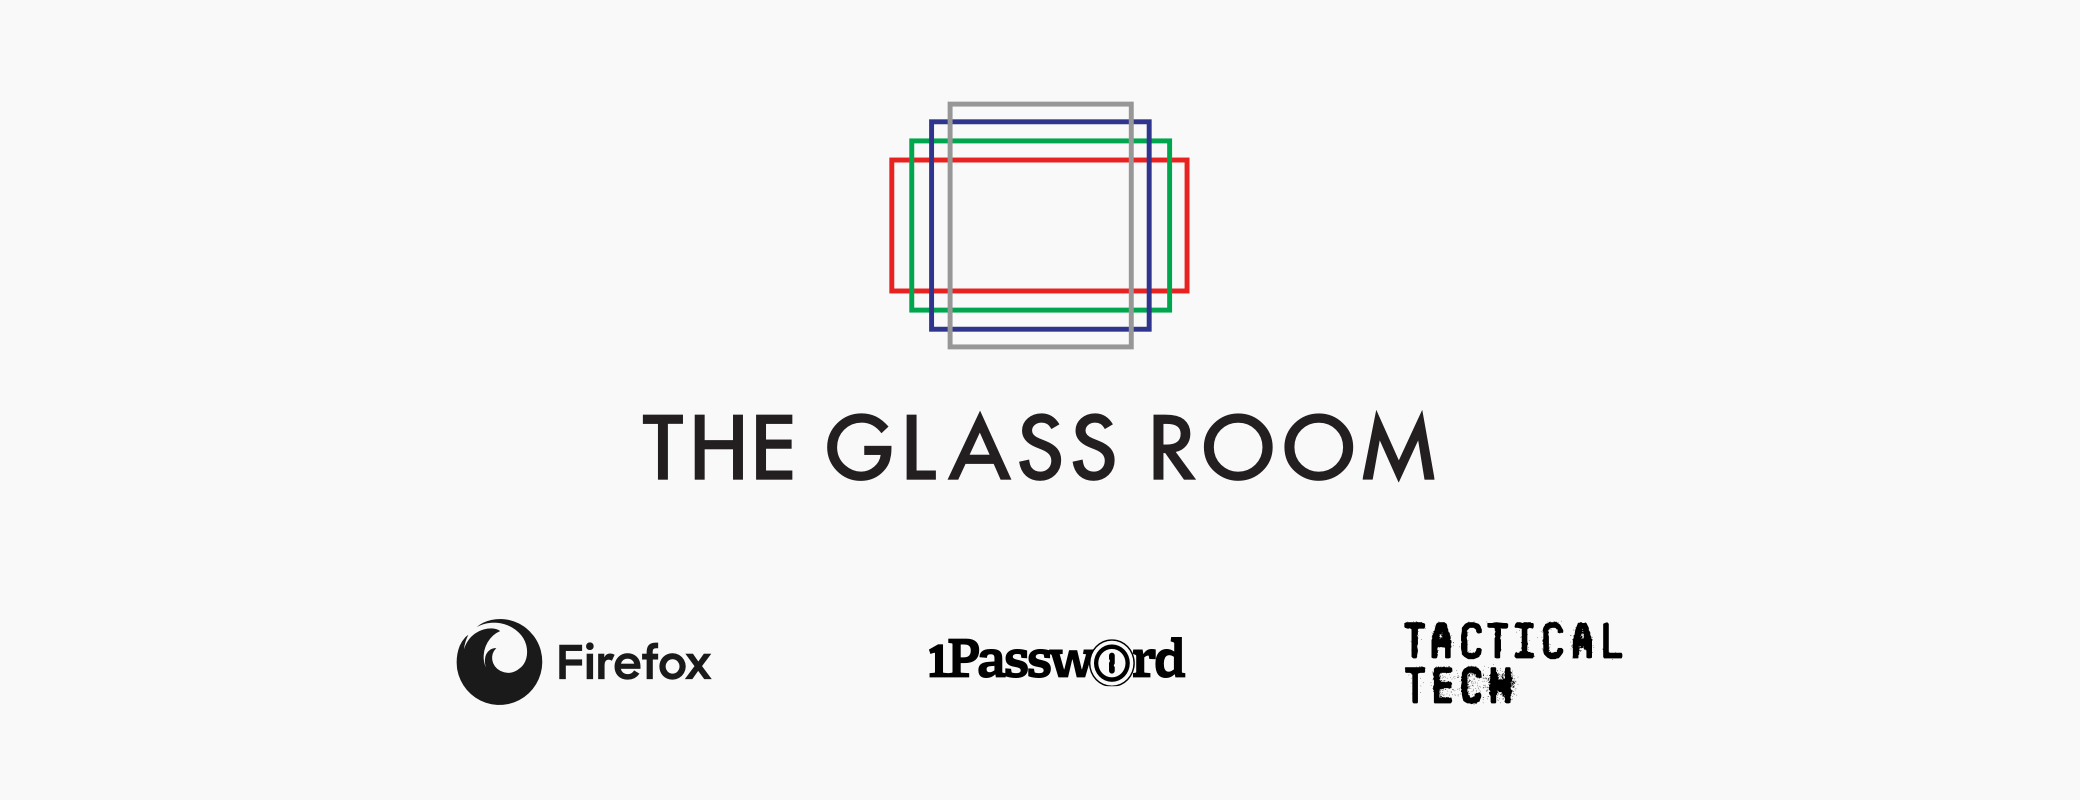 1Password and Mozilla at The Glass Room exhibition